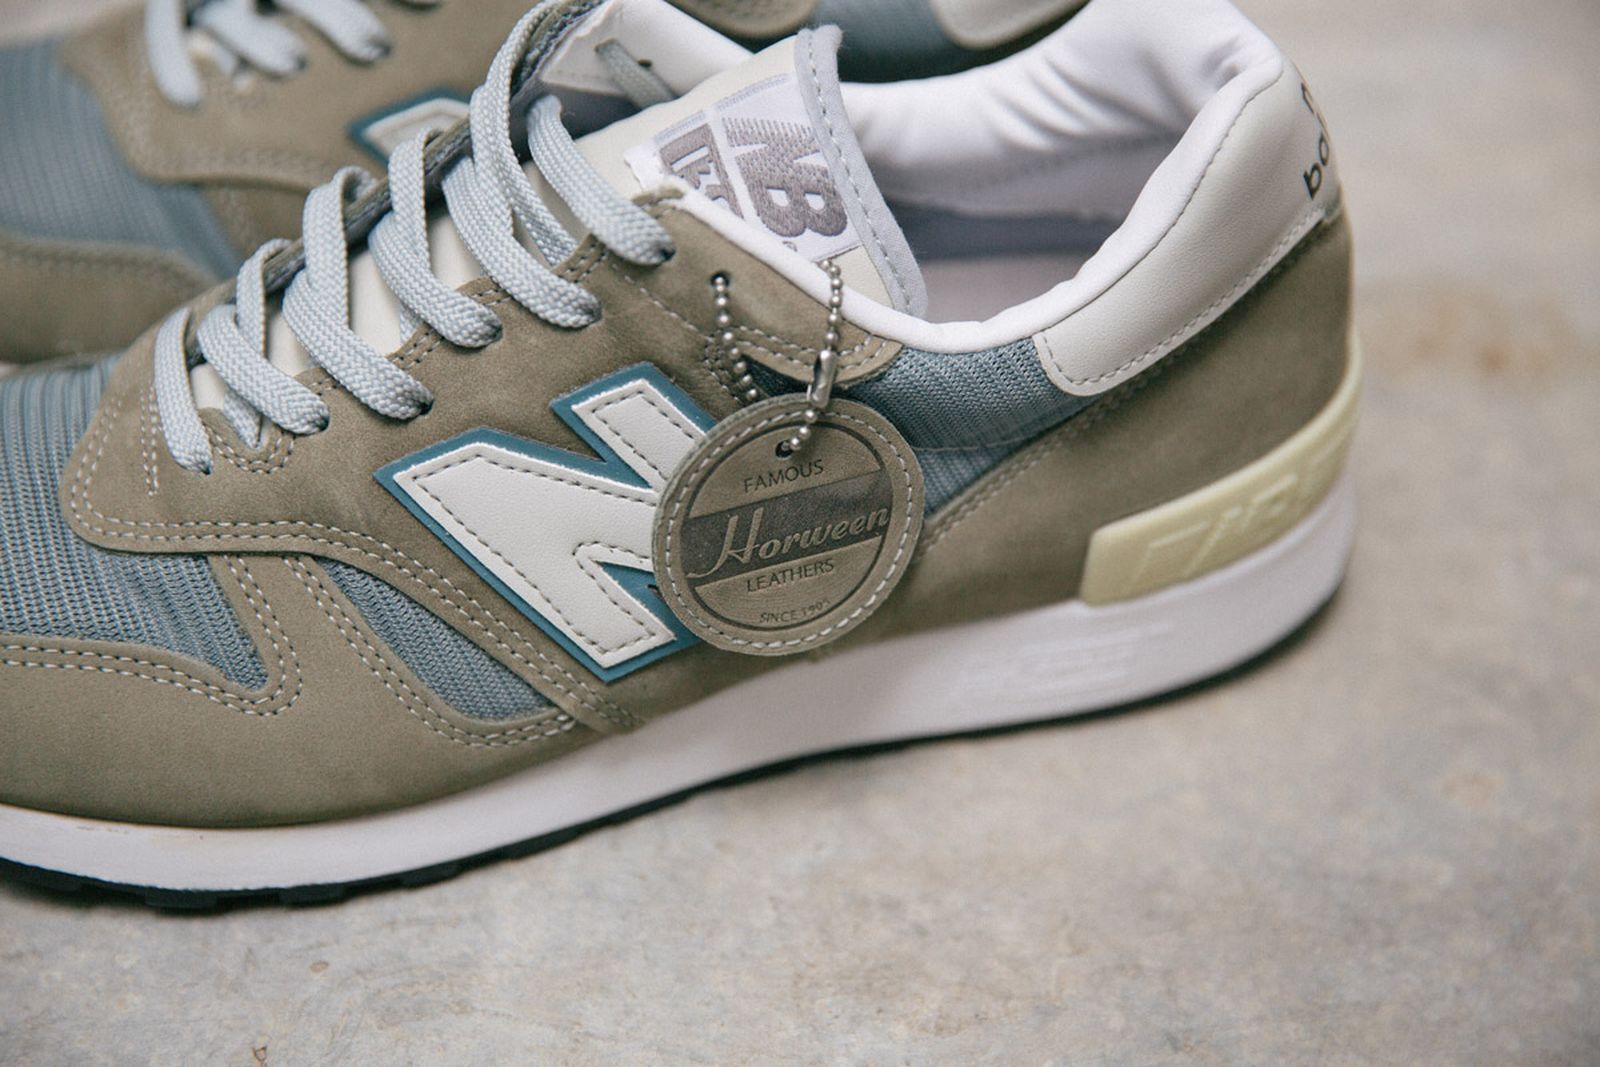 New Balance 1300: How Japan Became Obsessed With the Rare